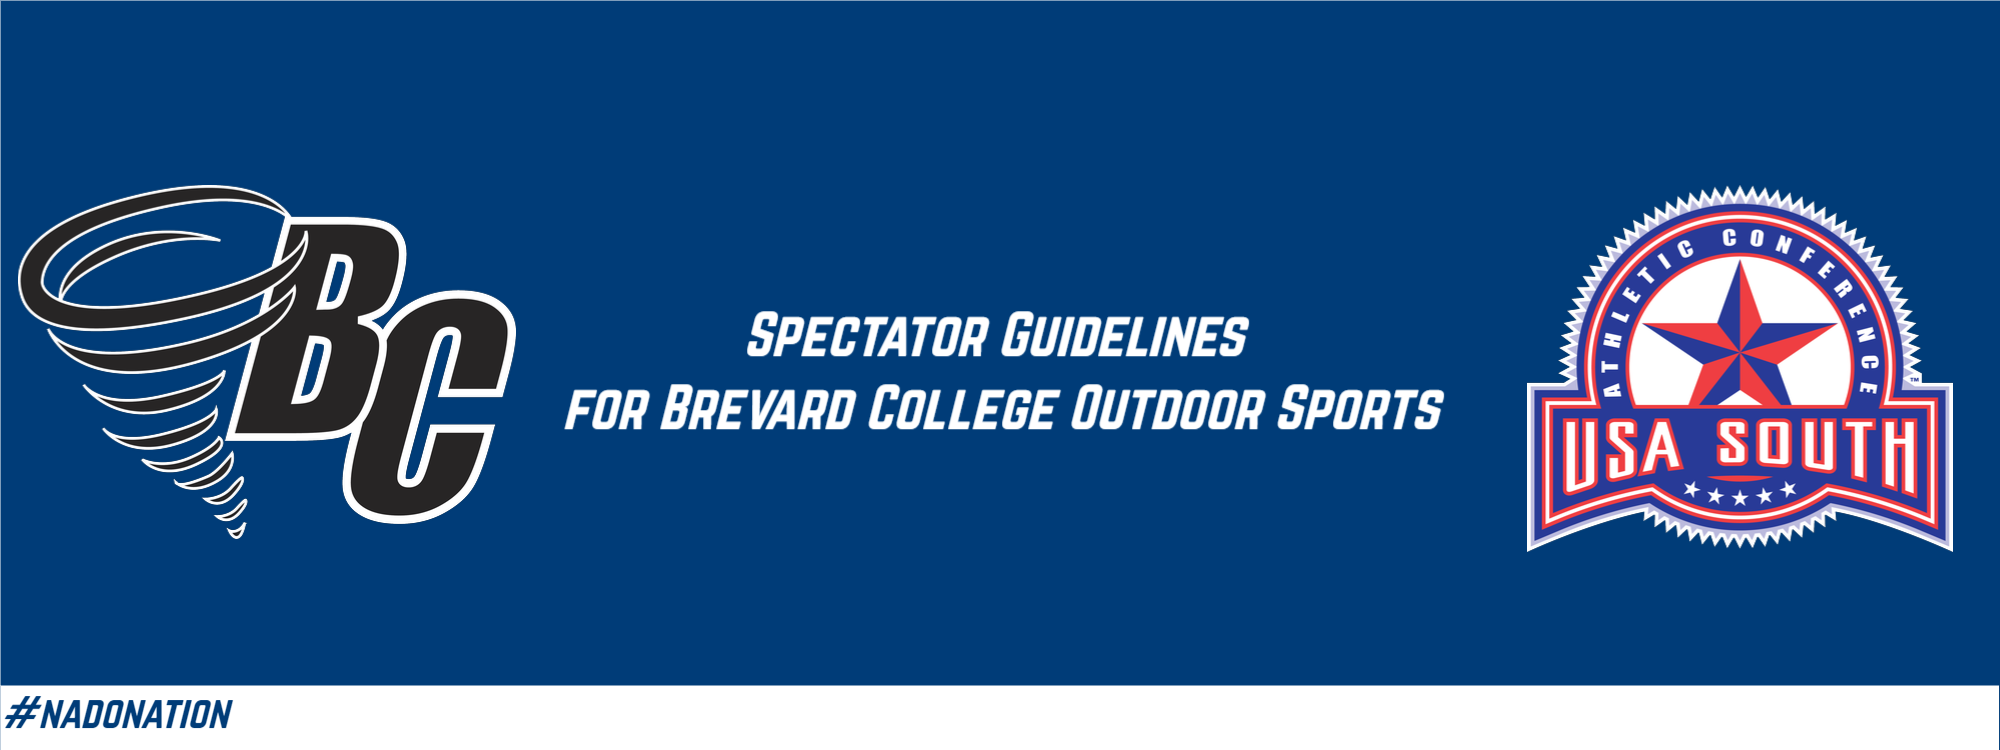 Spectator Guidelines for Brevard College Outdoor Sports in Spring, 2021